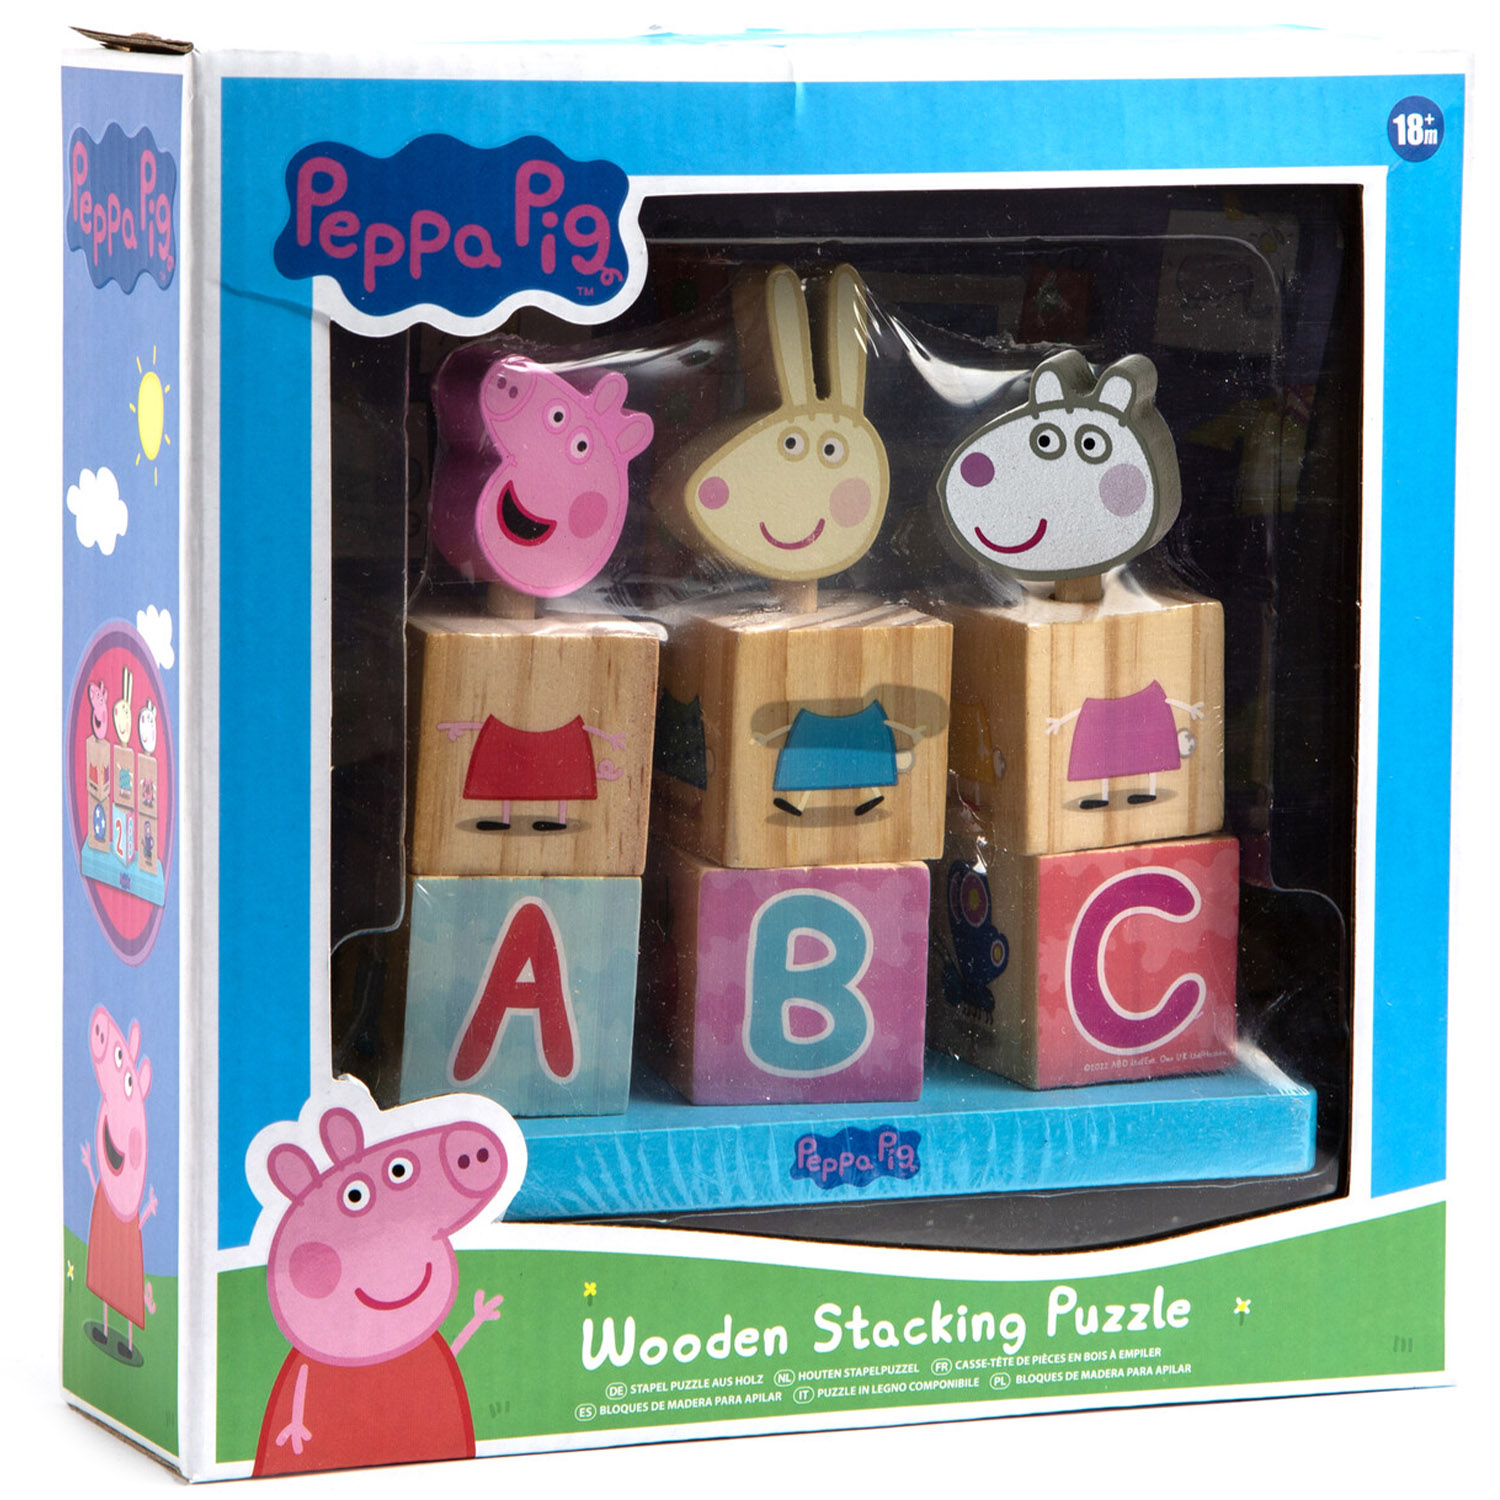 Peppa Pig Blue Wooden Stacking Puzzle Toy Image 1